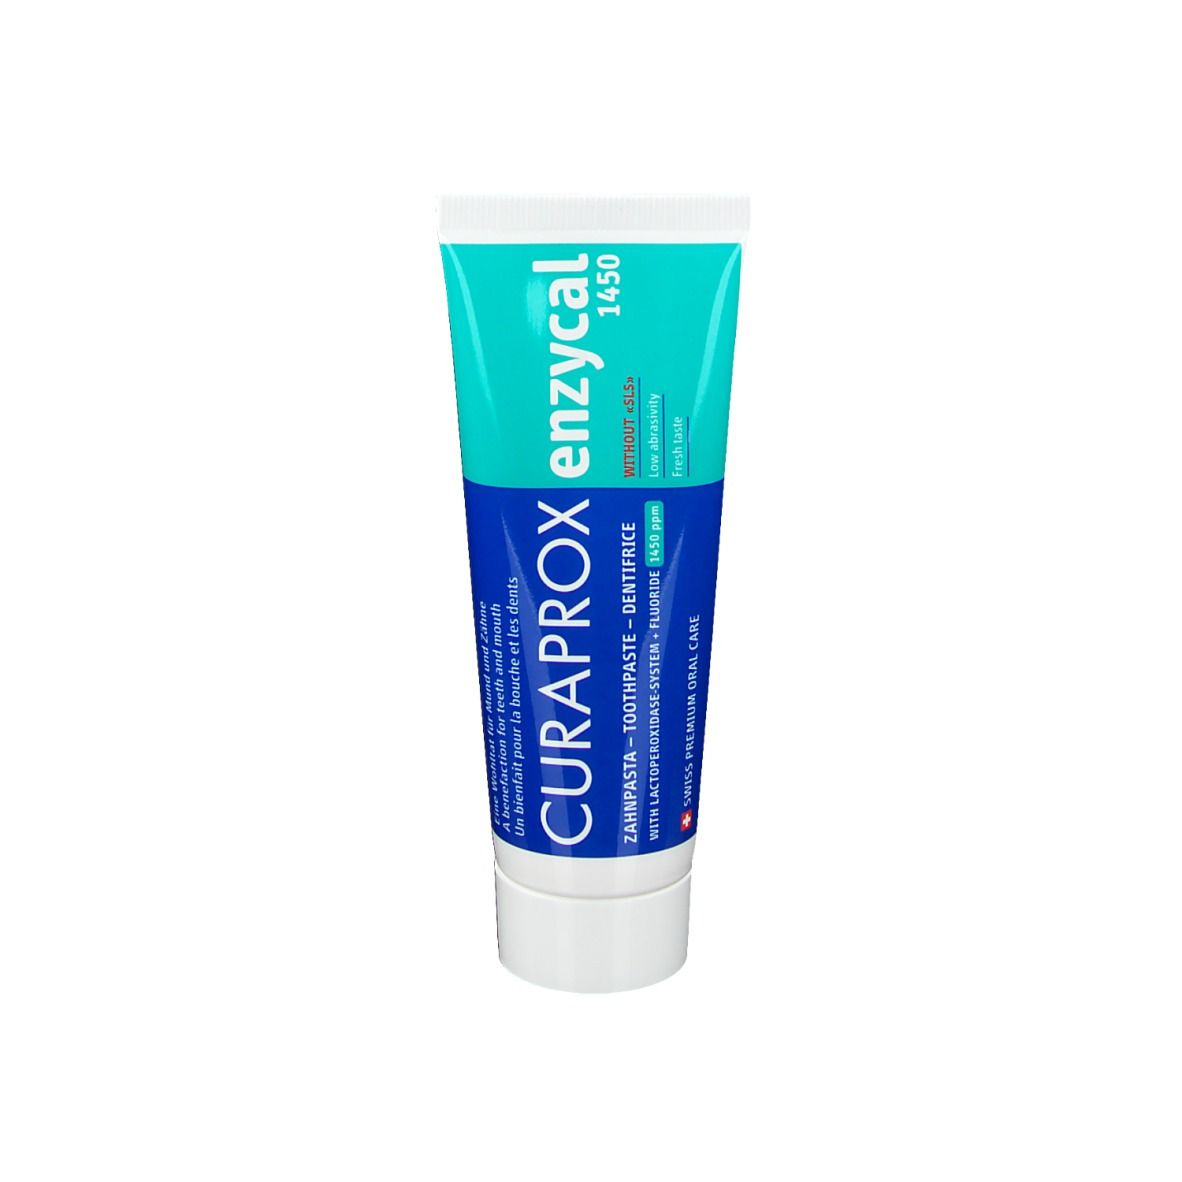 Curaprox Enzycal 1450 PPM Dentifrice